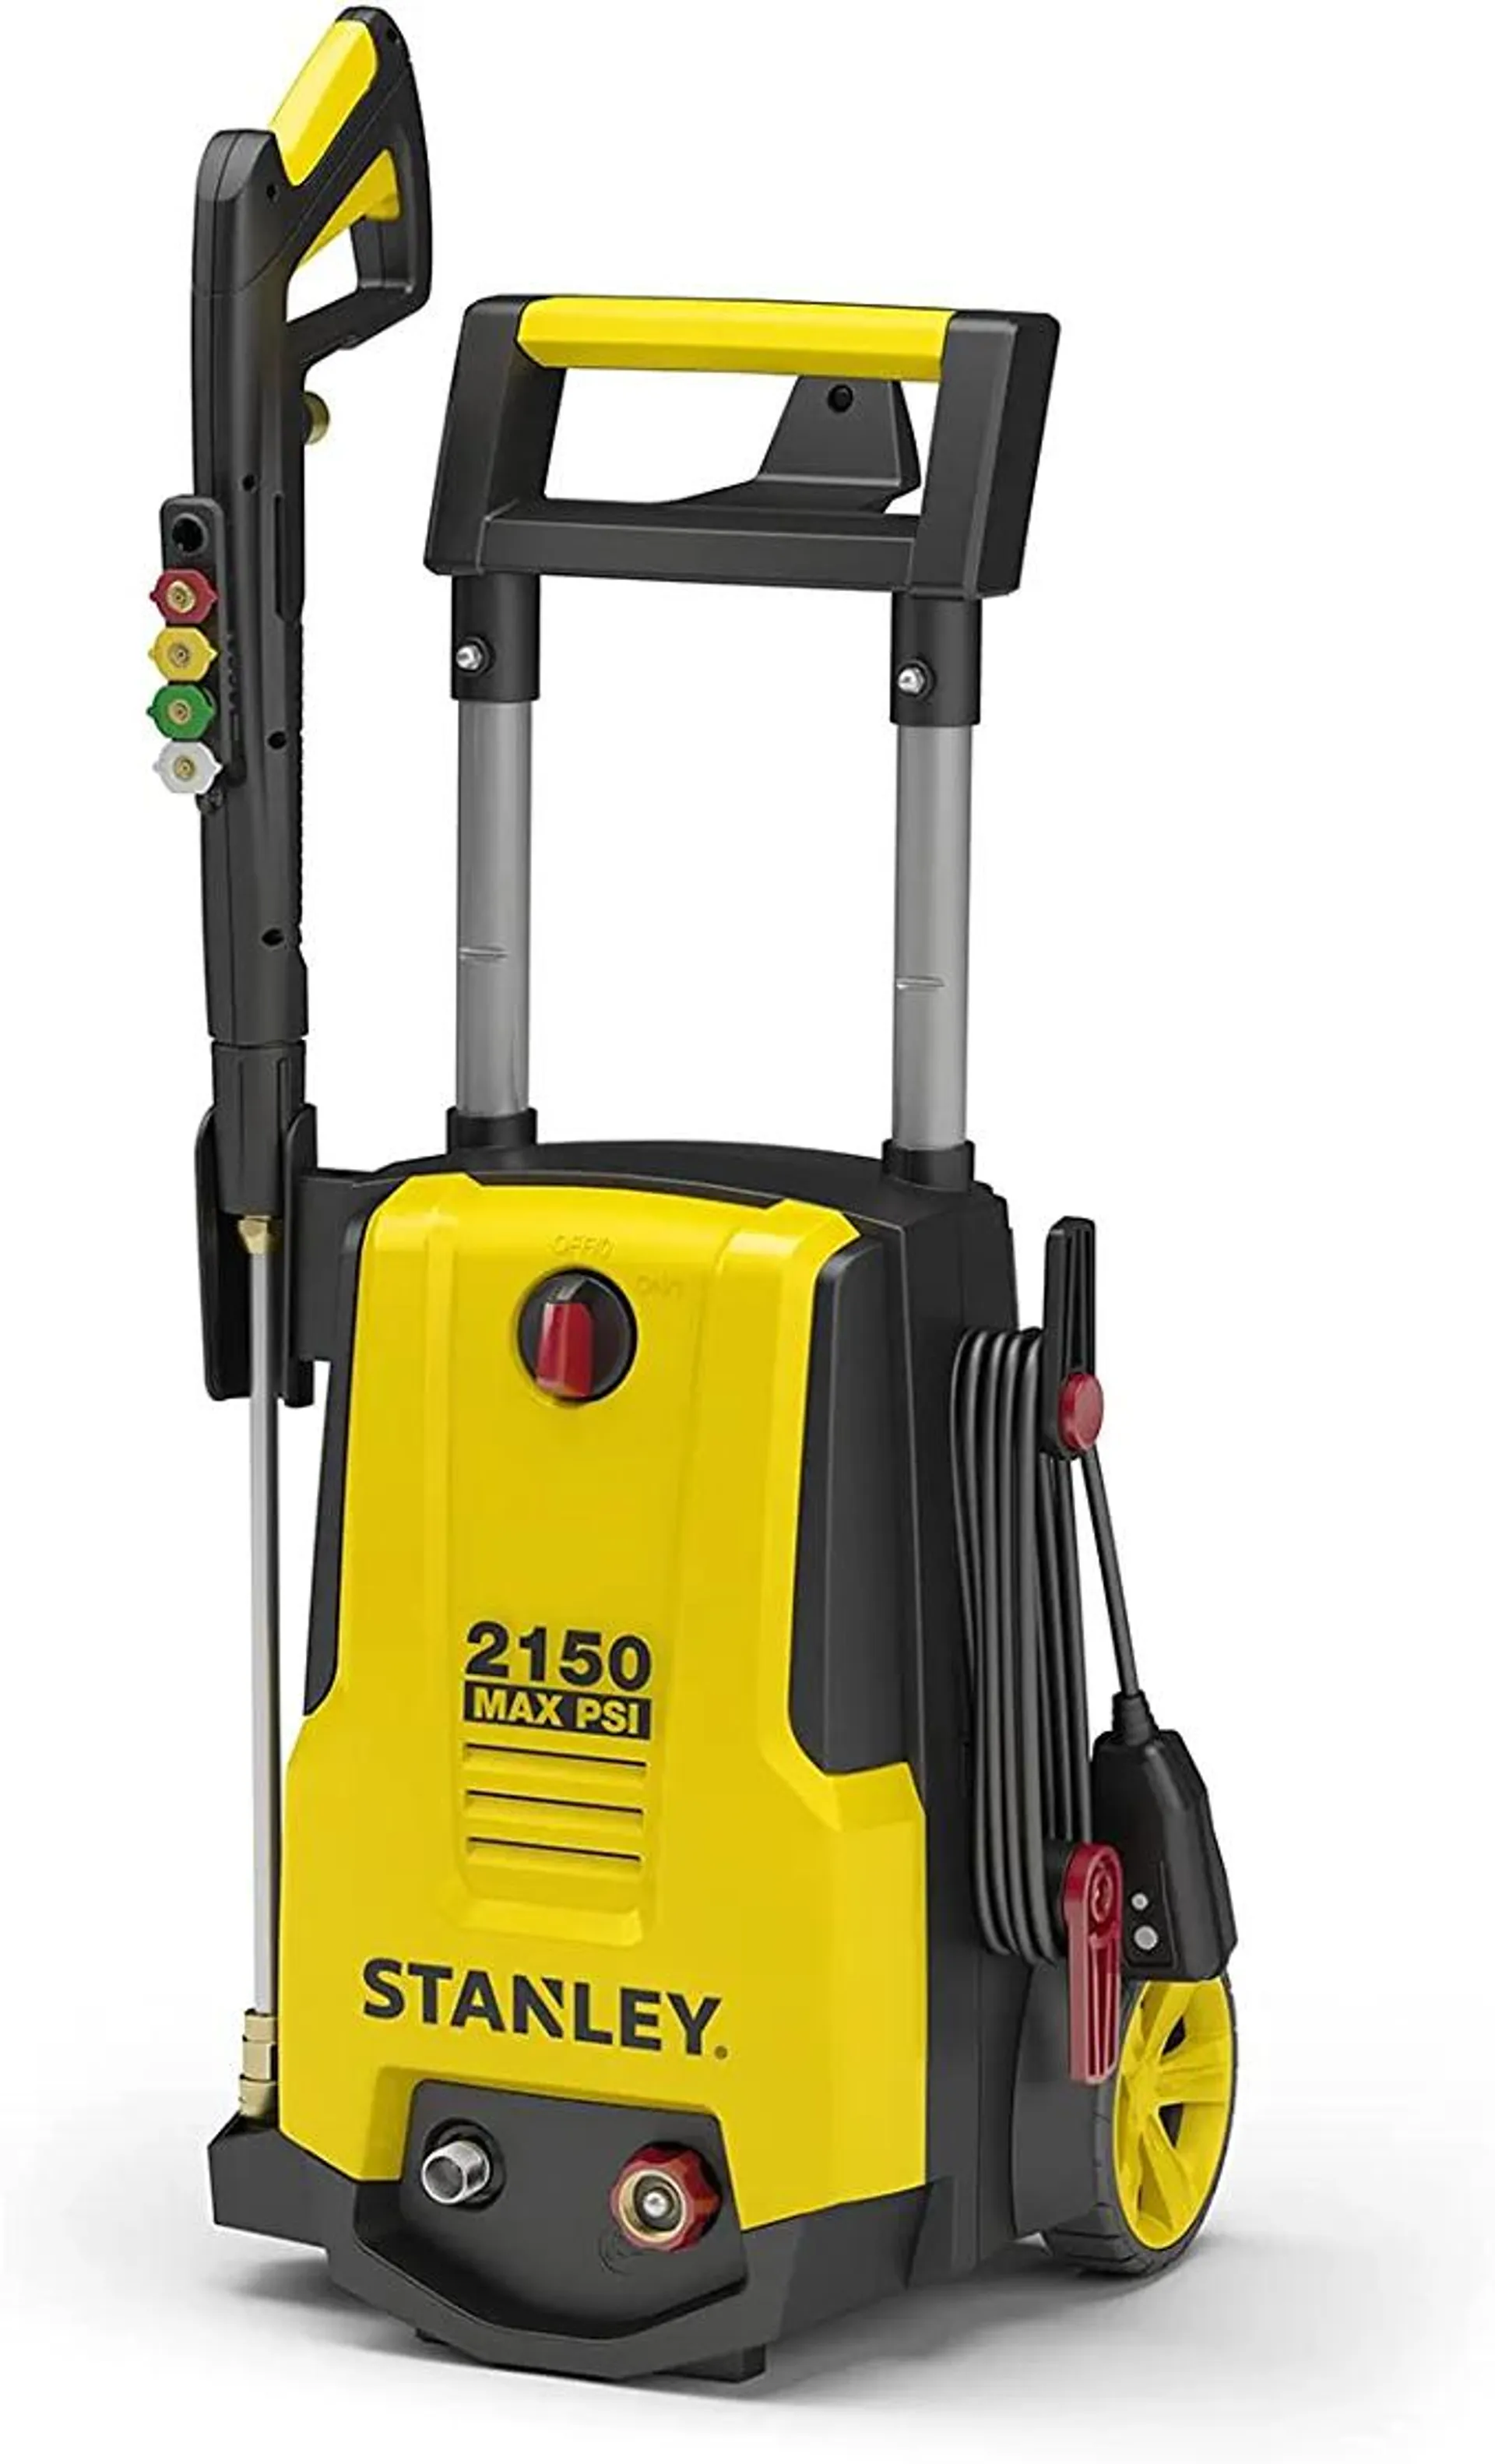 Stanley SHP2150 Portable Electric Pressure Washer, 2150 PSI, 1.4 GPM, 13 AMP, with Metal Lance, Foam Cannon, Quick Connect Gun, 25' Hose, 25lbs